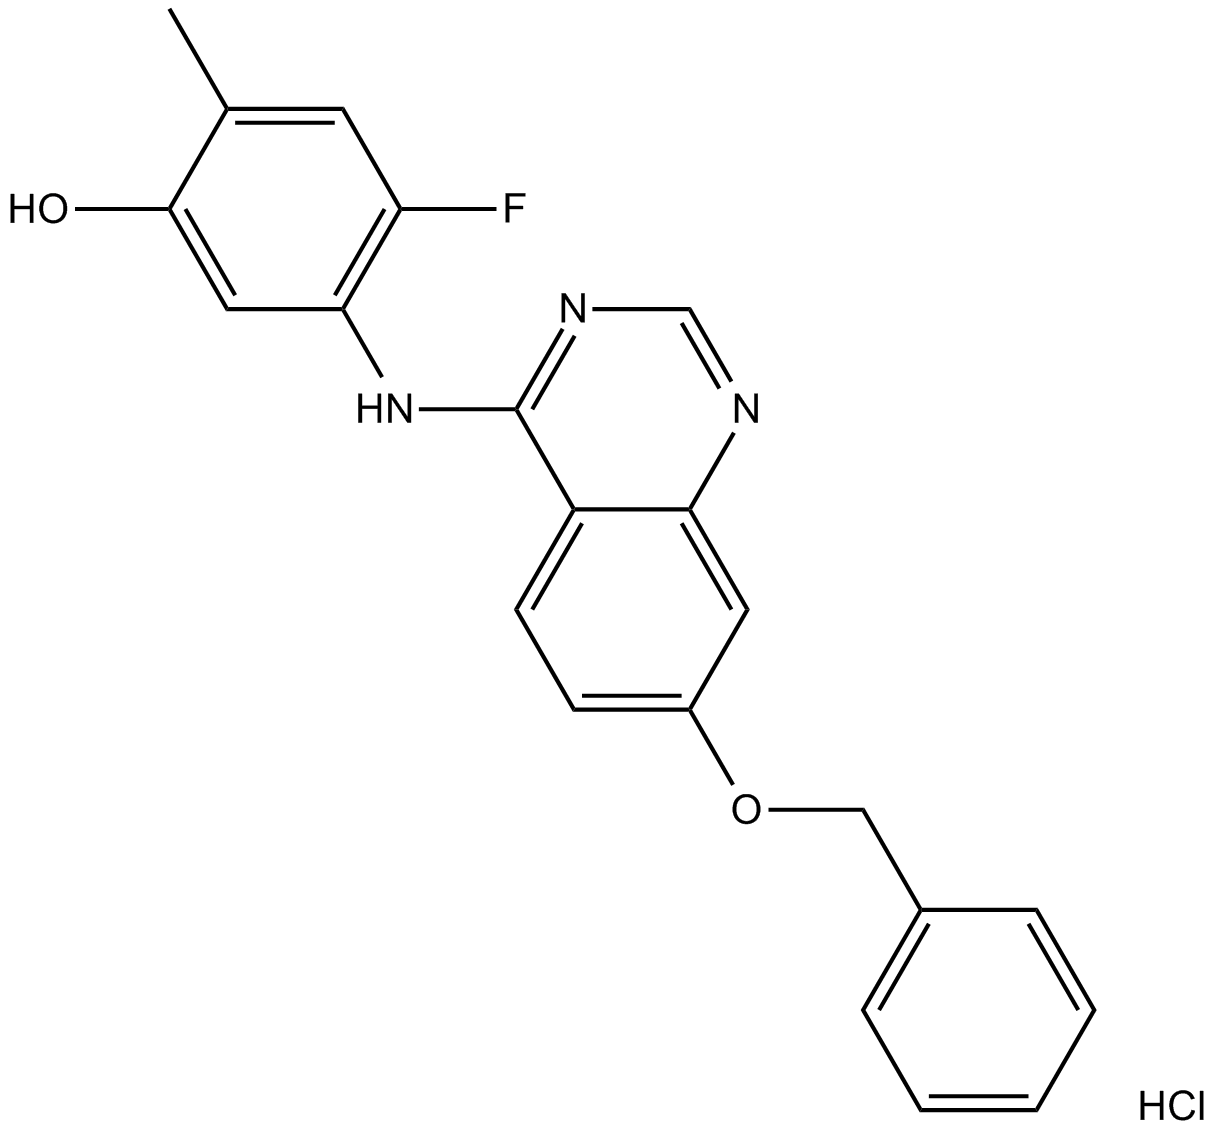 ZM 323881 HCl  Chemical Structure